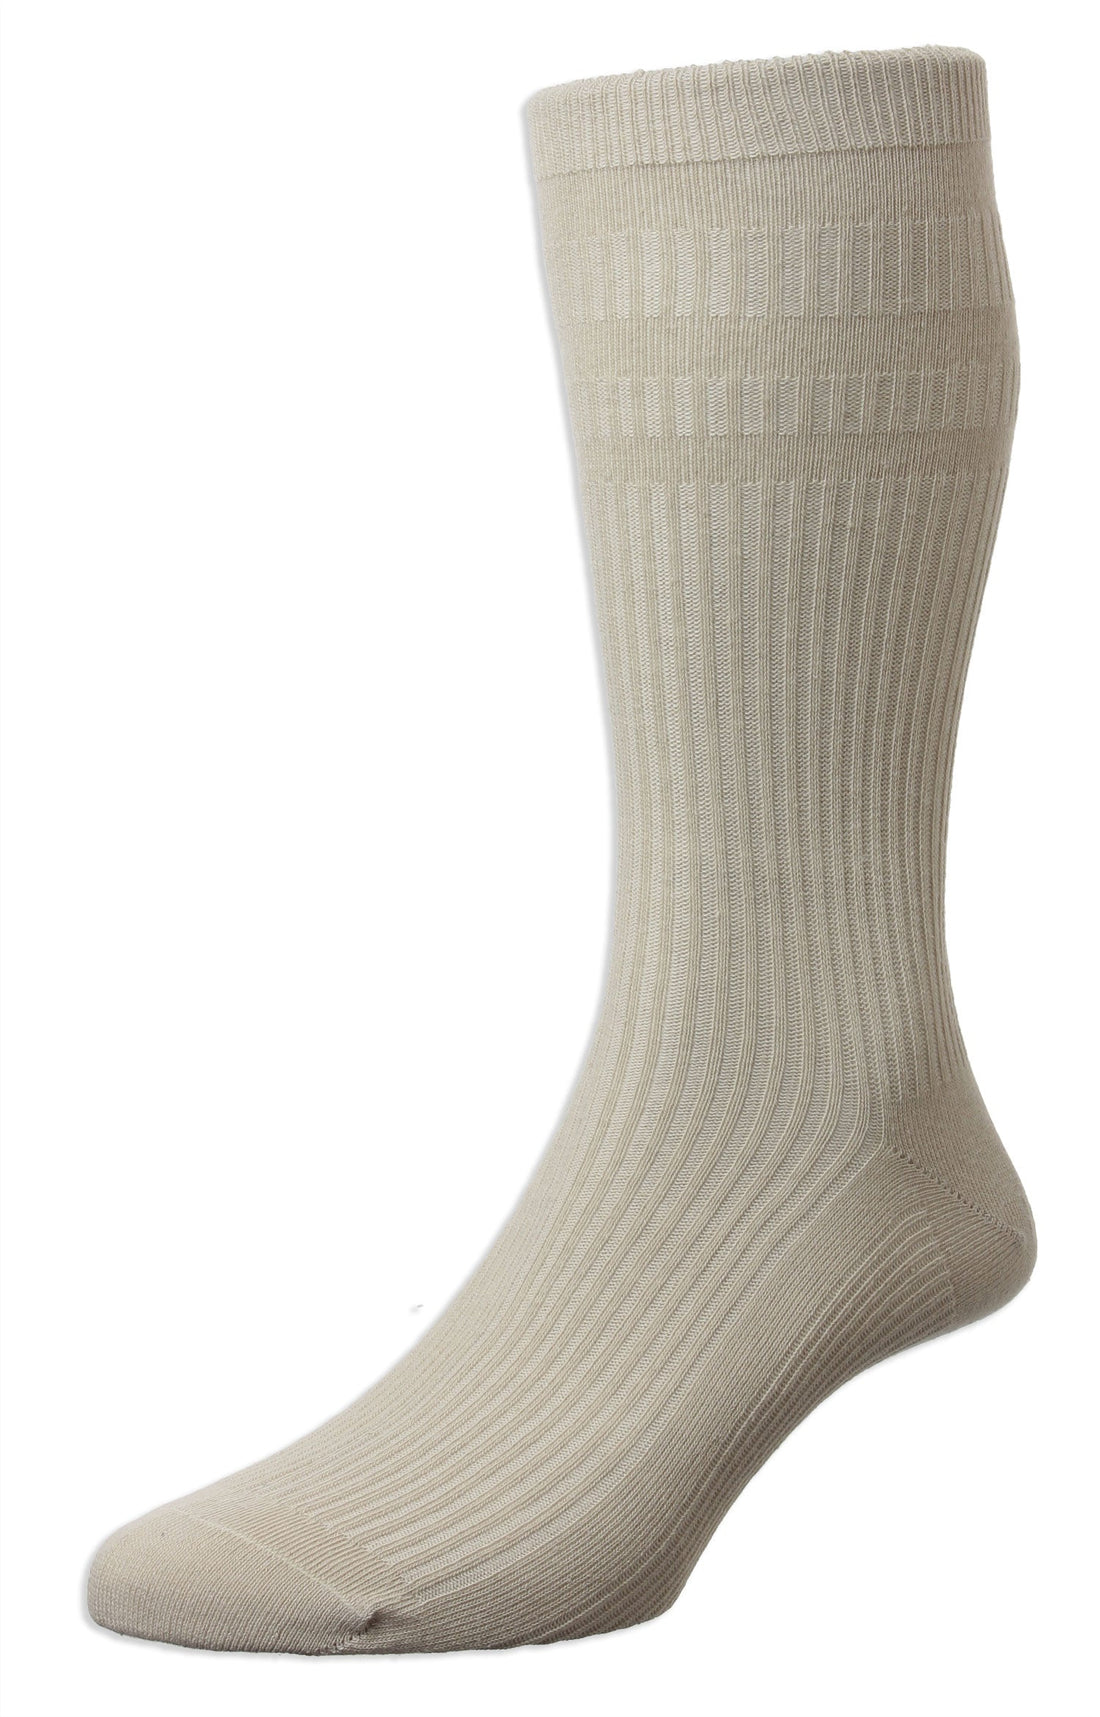 HJ Hall Extra Wide Soft Top Sock | Sanitised Cotton - Grey